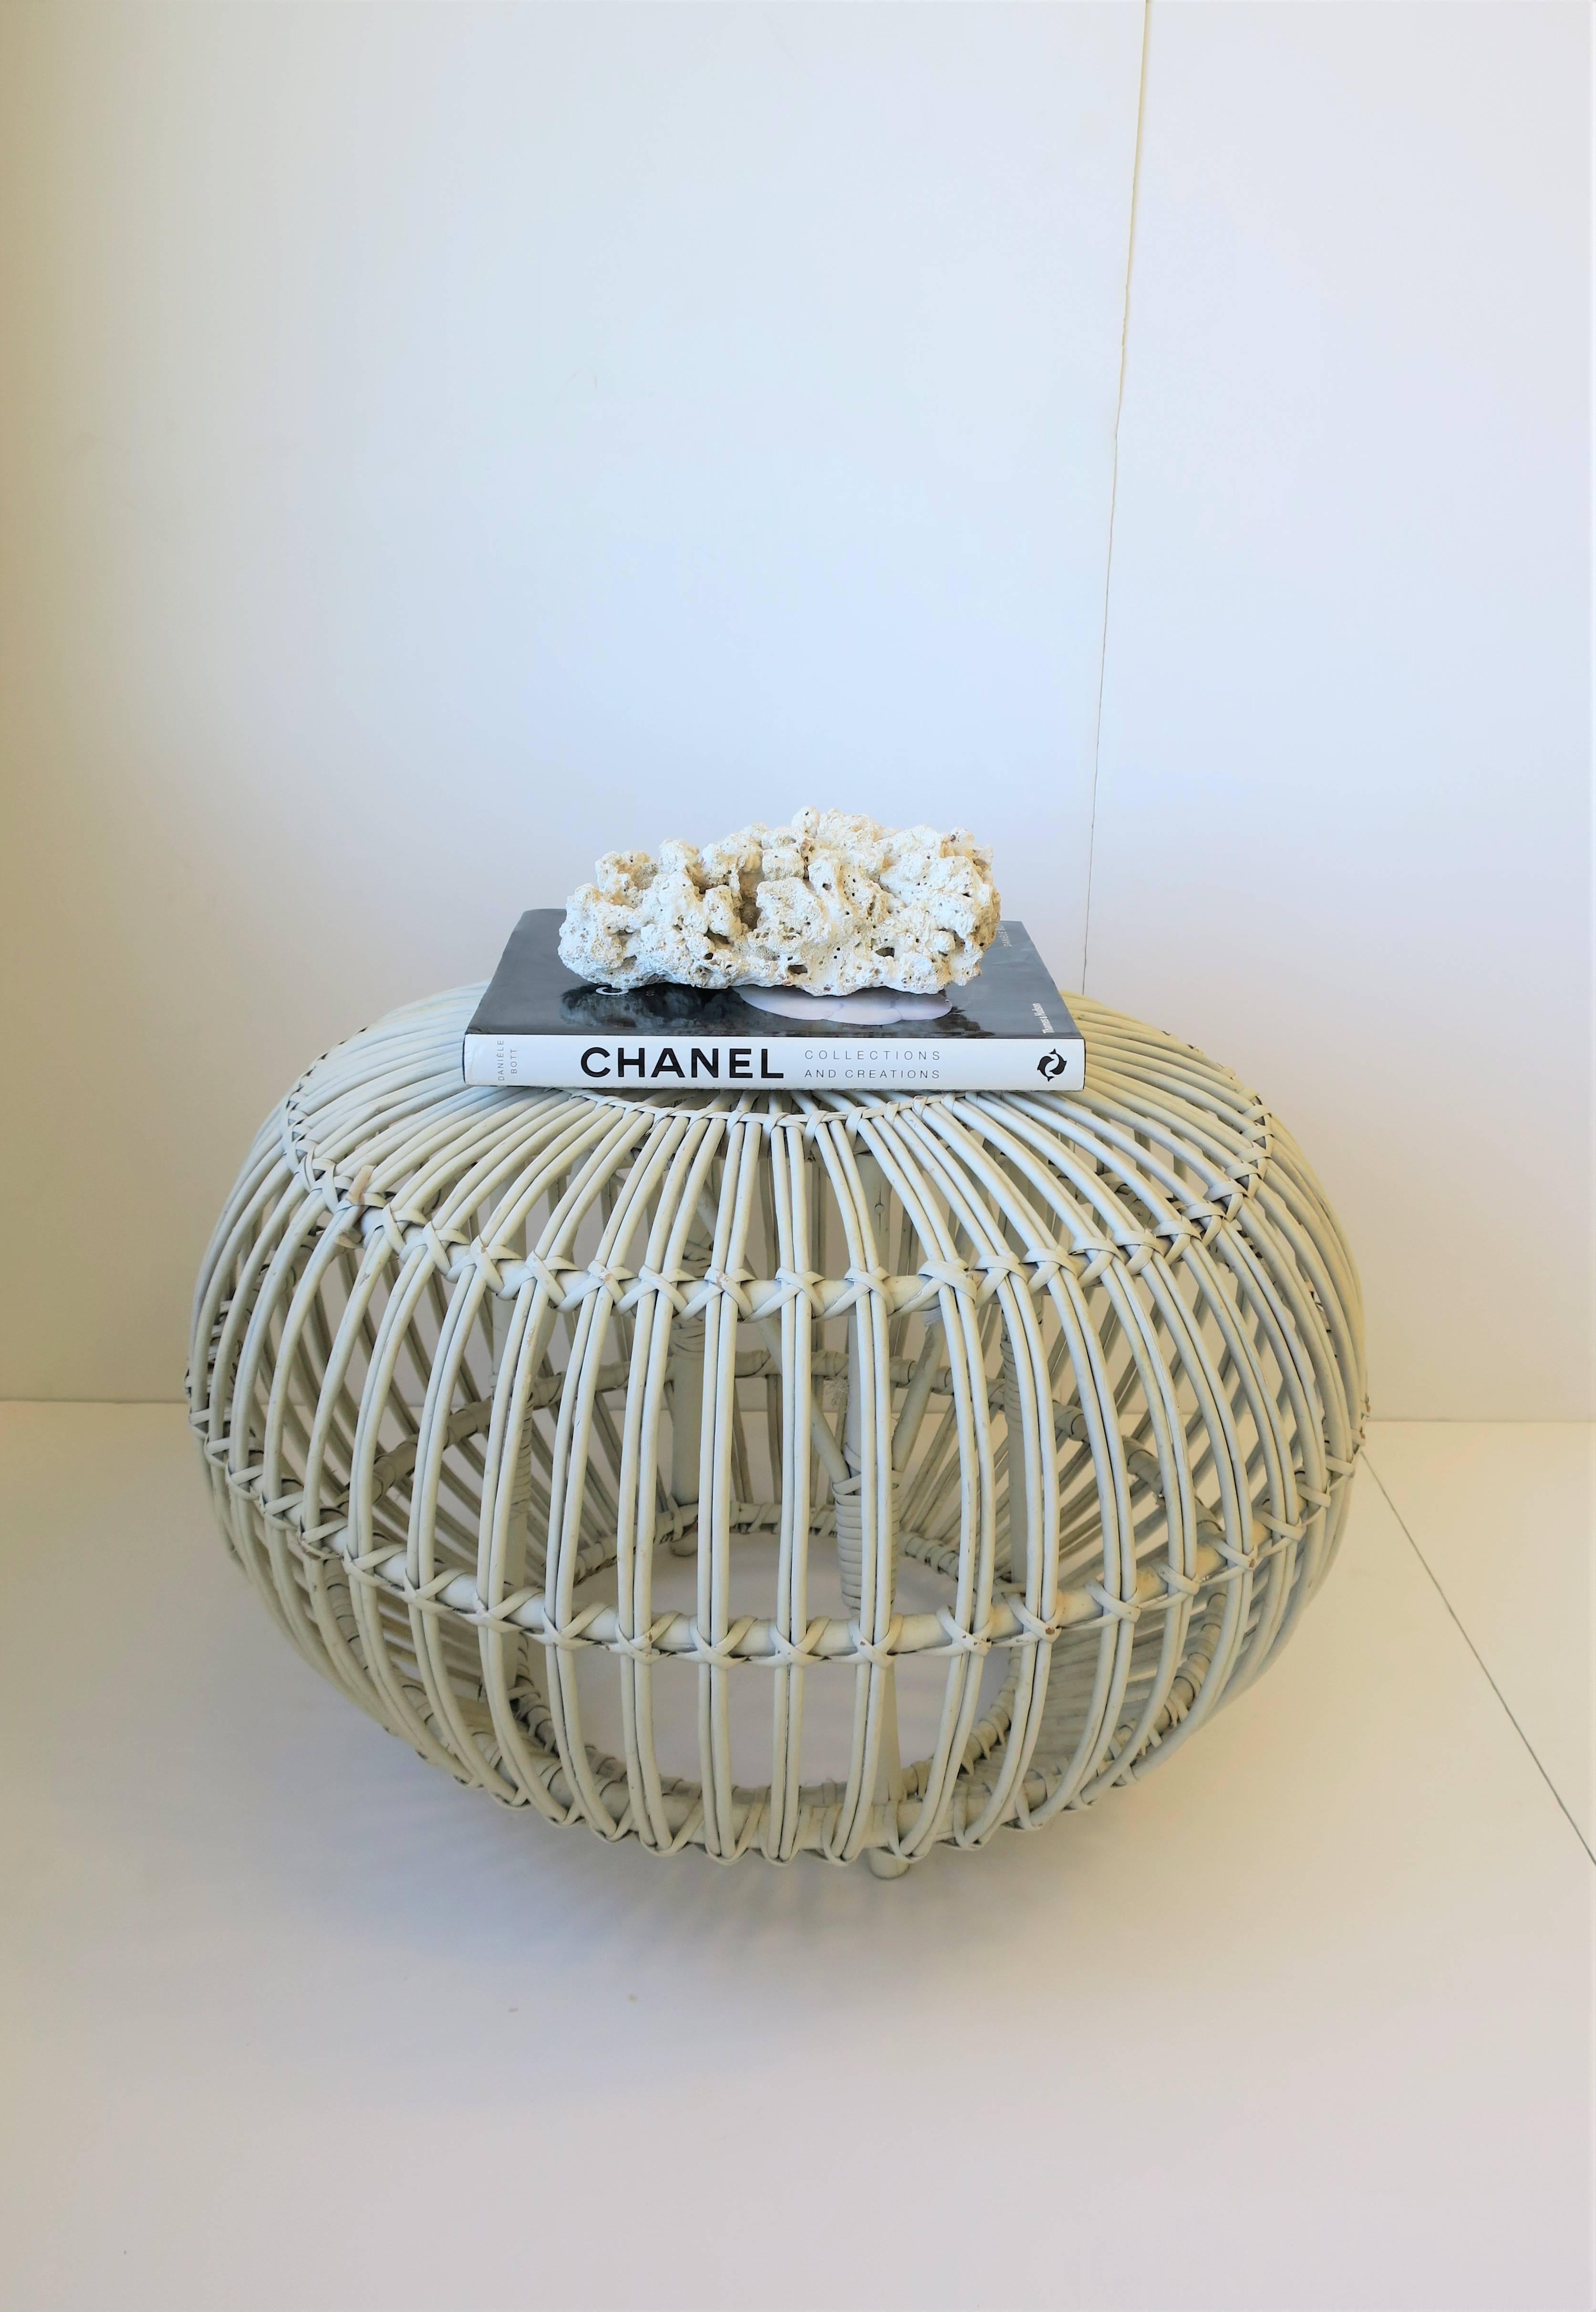 Italian Midcentury Round White Rattan Stool or Side Table by Franco Albini